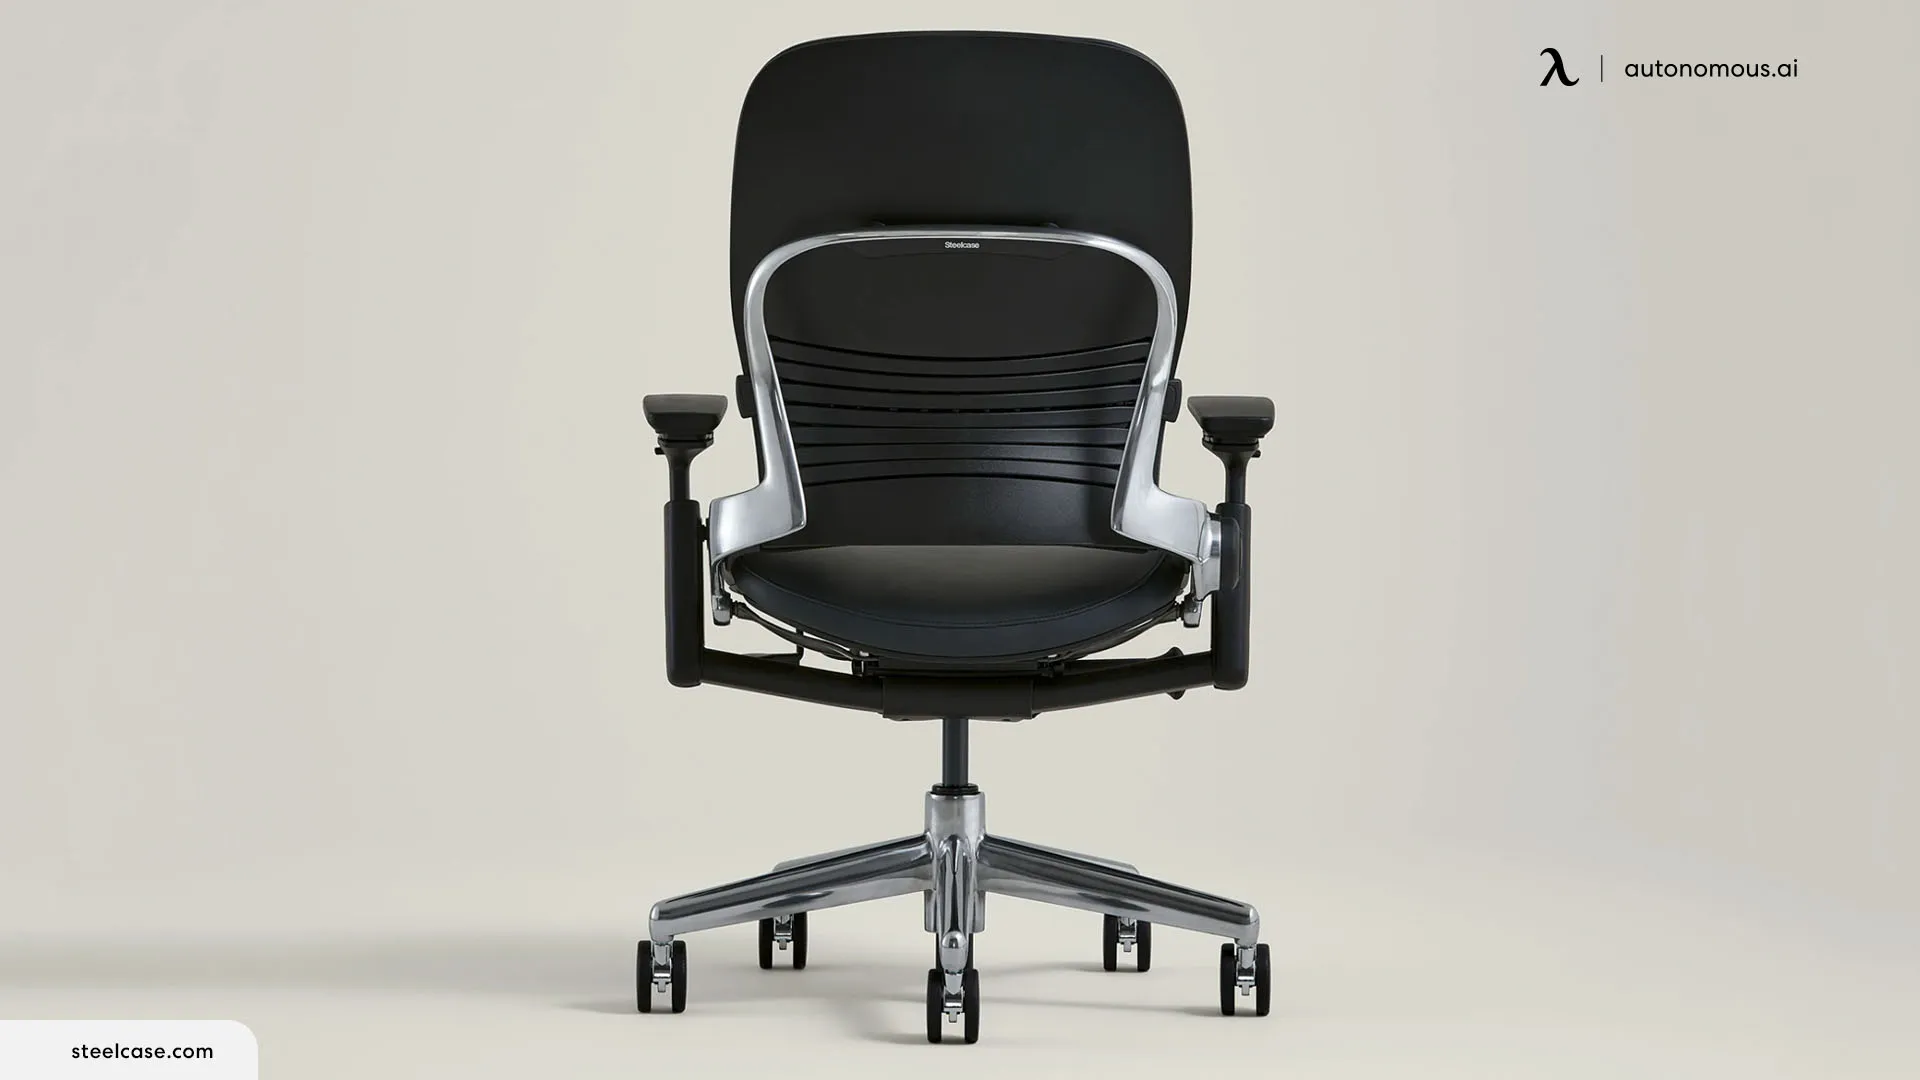 Steelcase Leap Office Chair